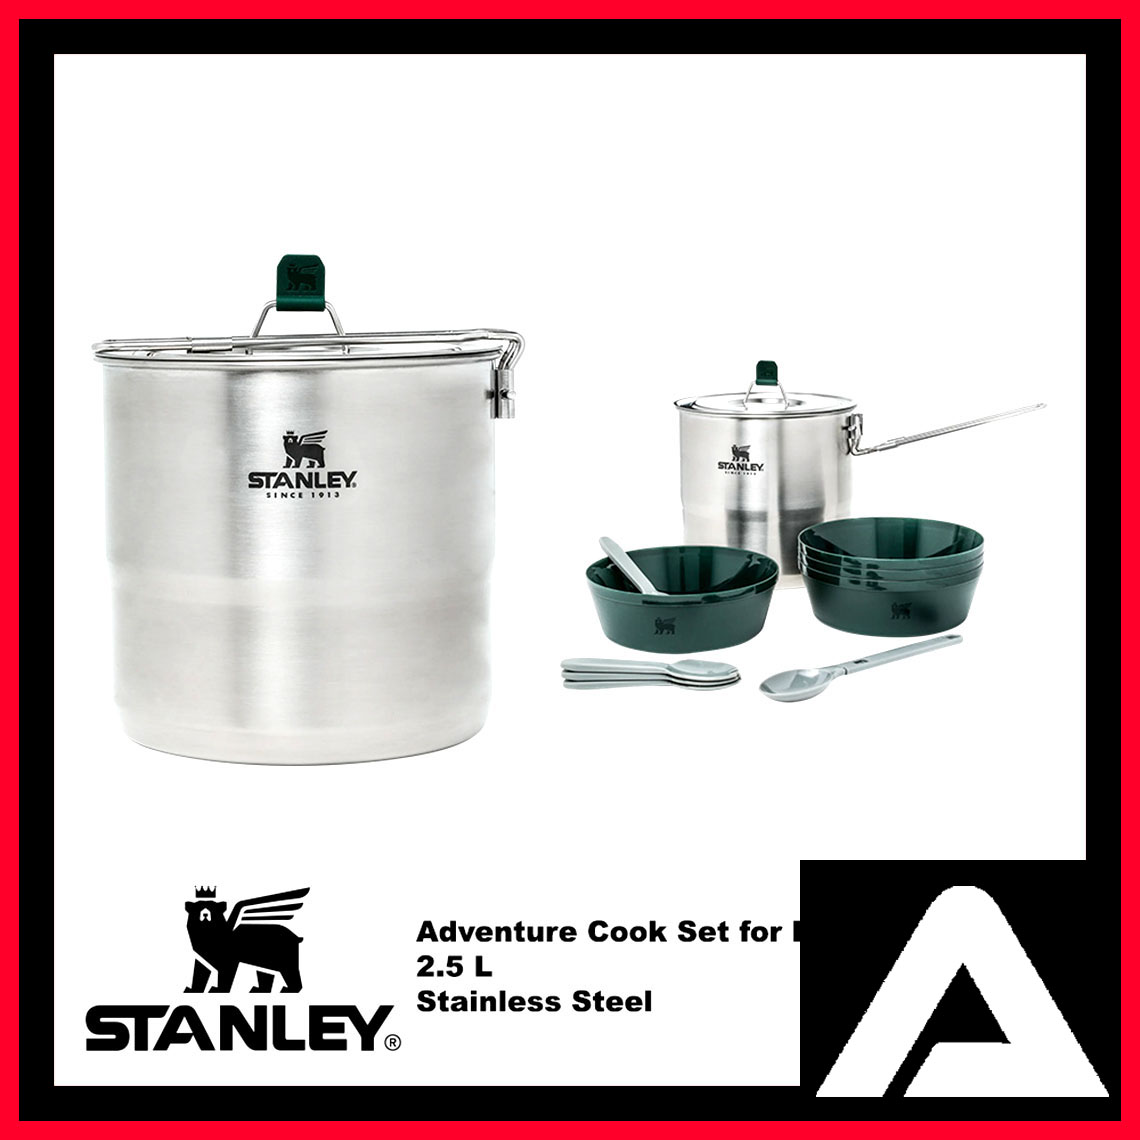 Stanley Adventure Cook Set for Four